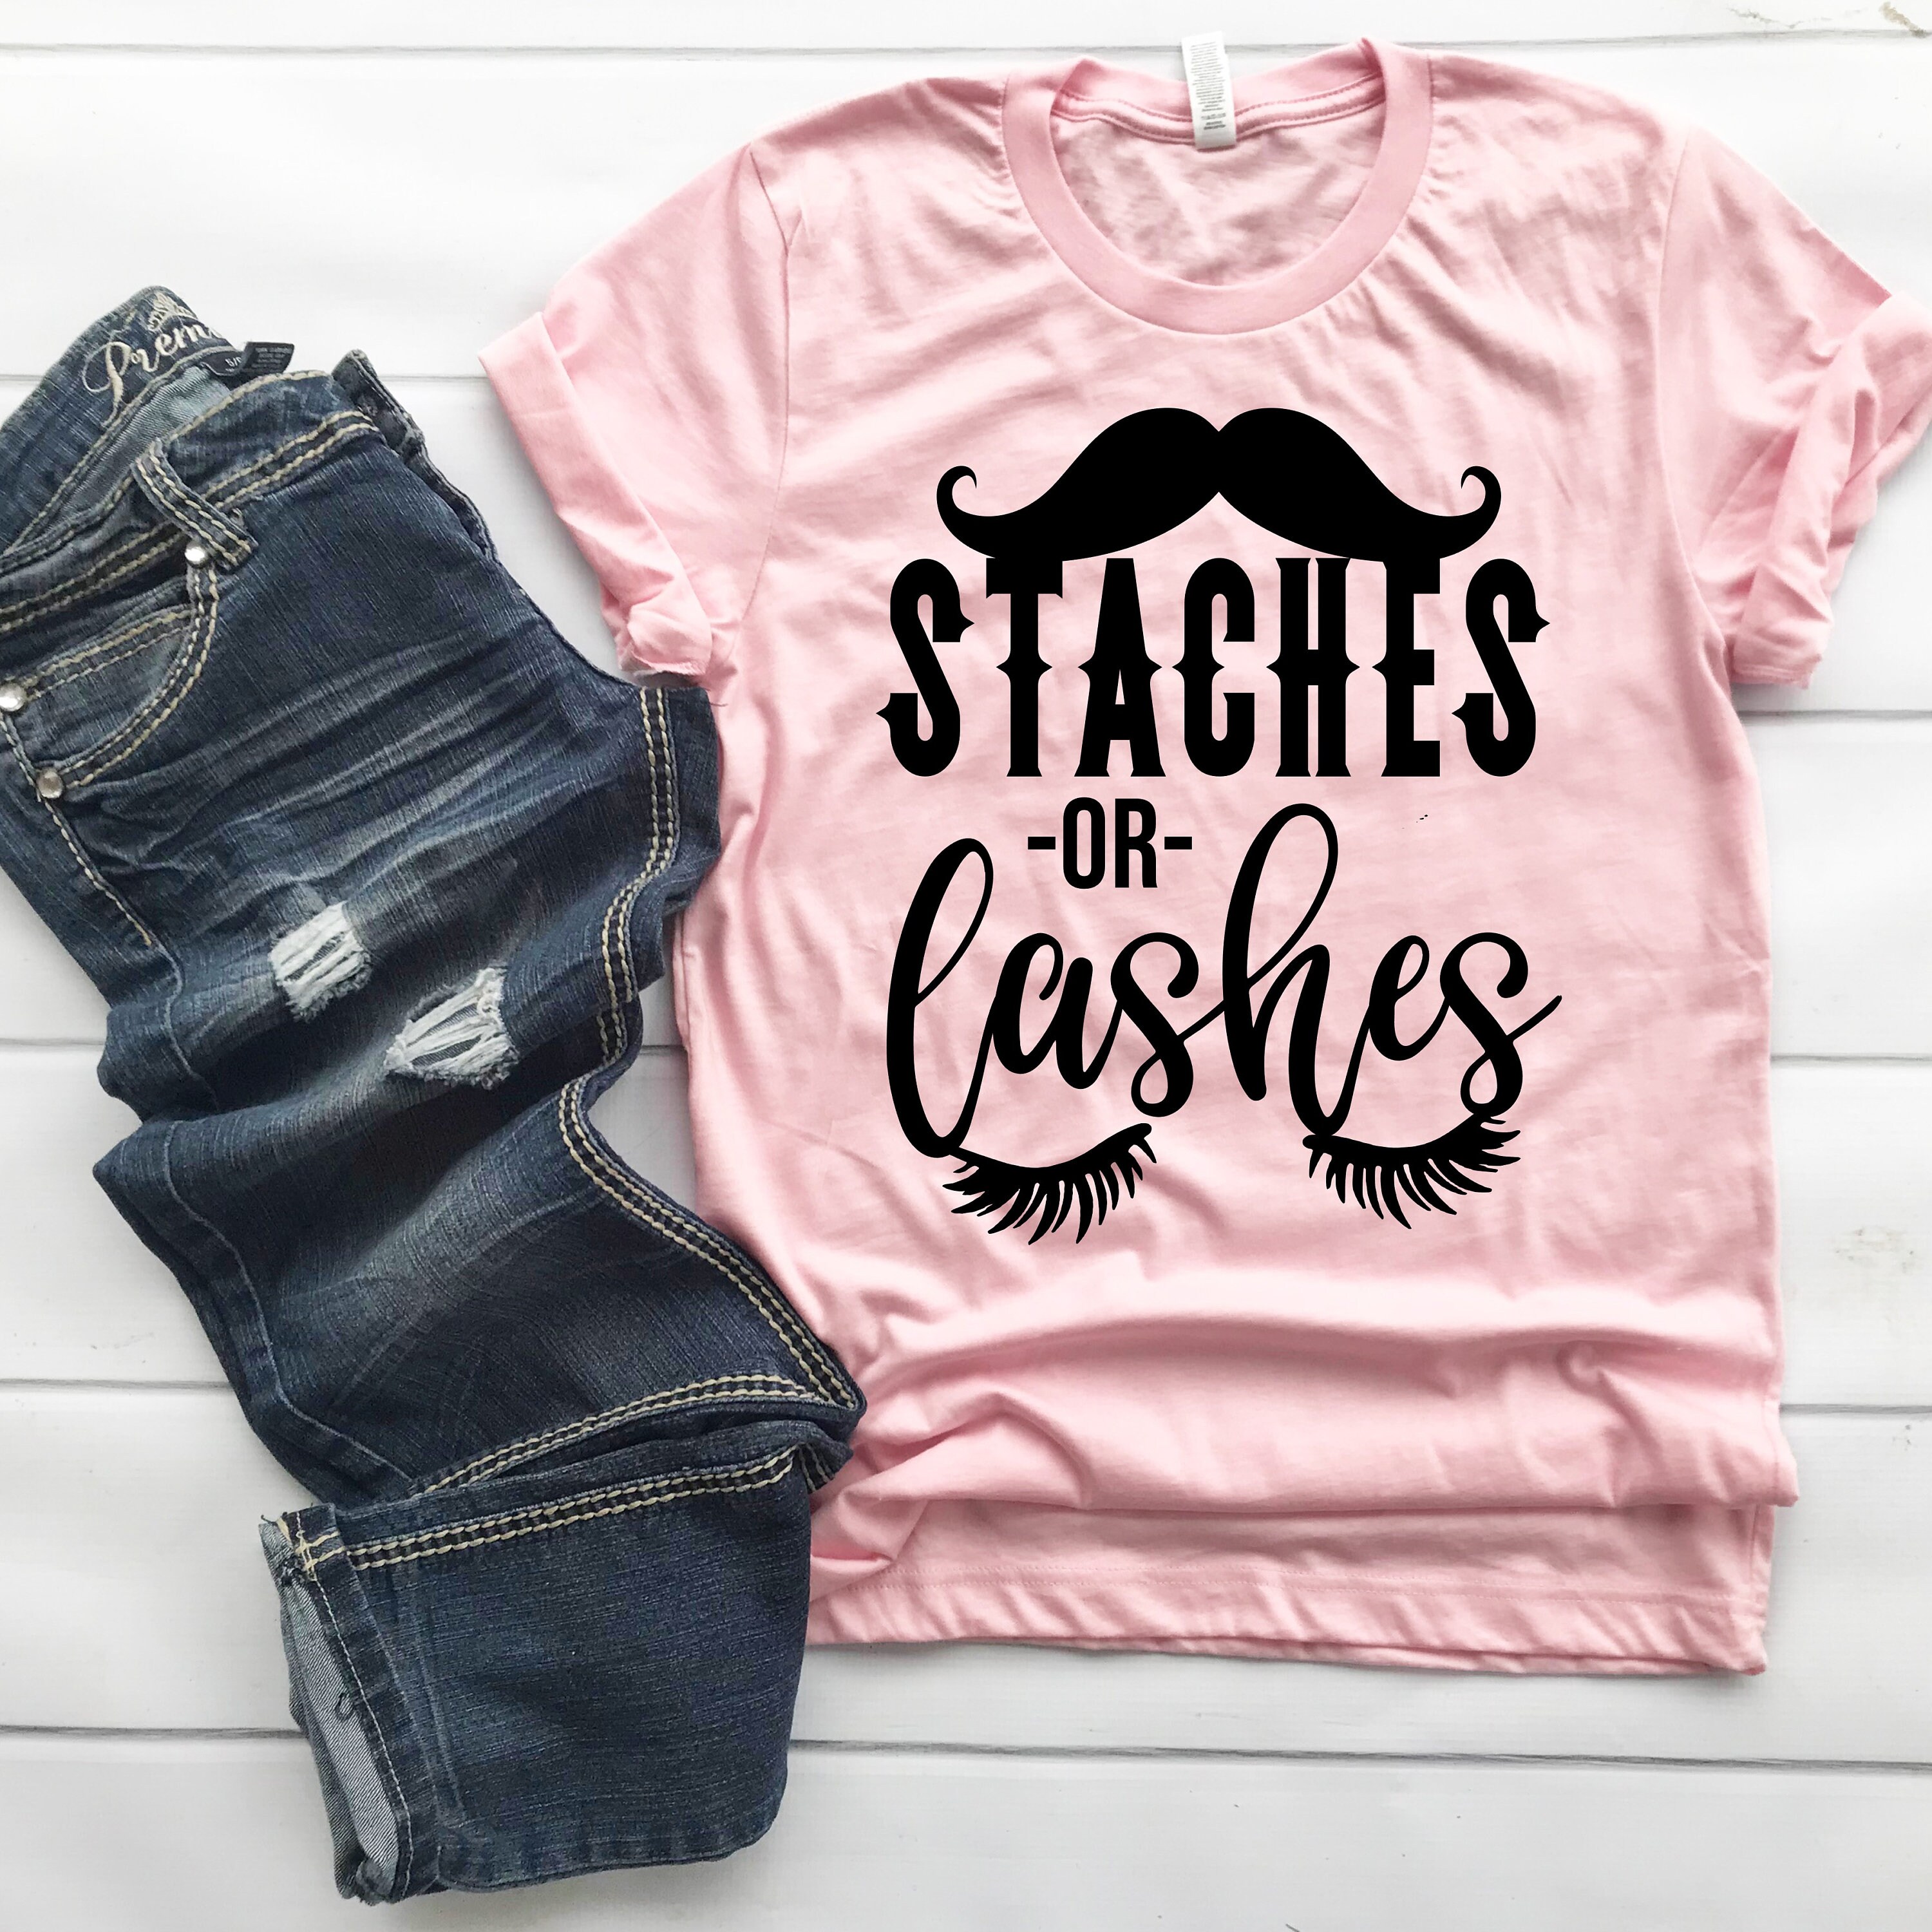 Staches or Lashes Shirt Pregnancy Announcement Shirt Dad | Etsy